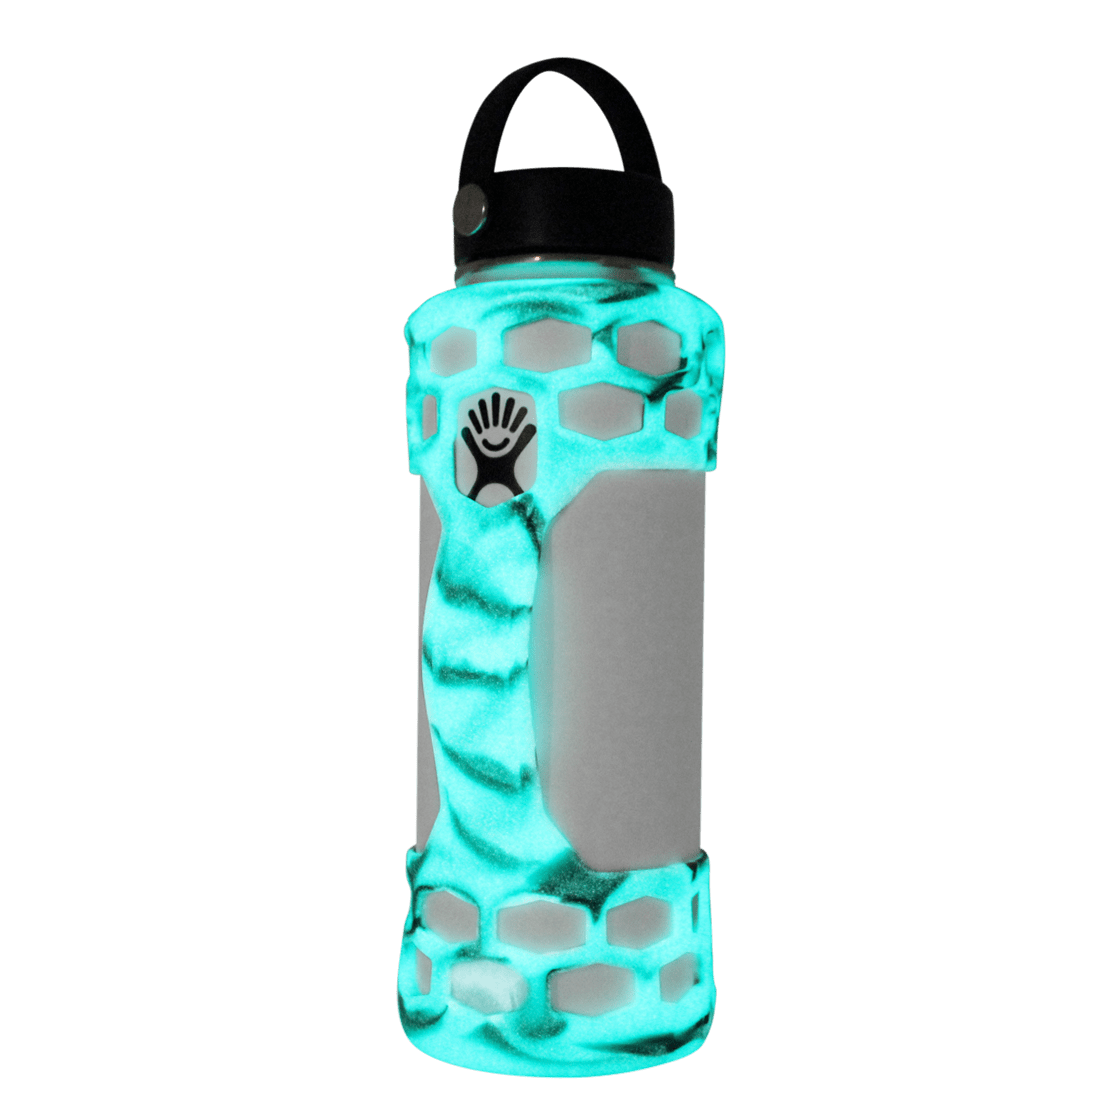 REUZBL Bottle Bumper Silicone Sleeve Protector with Handle for